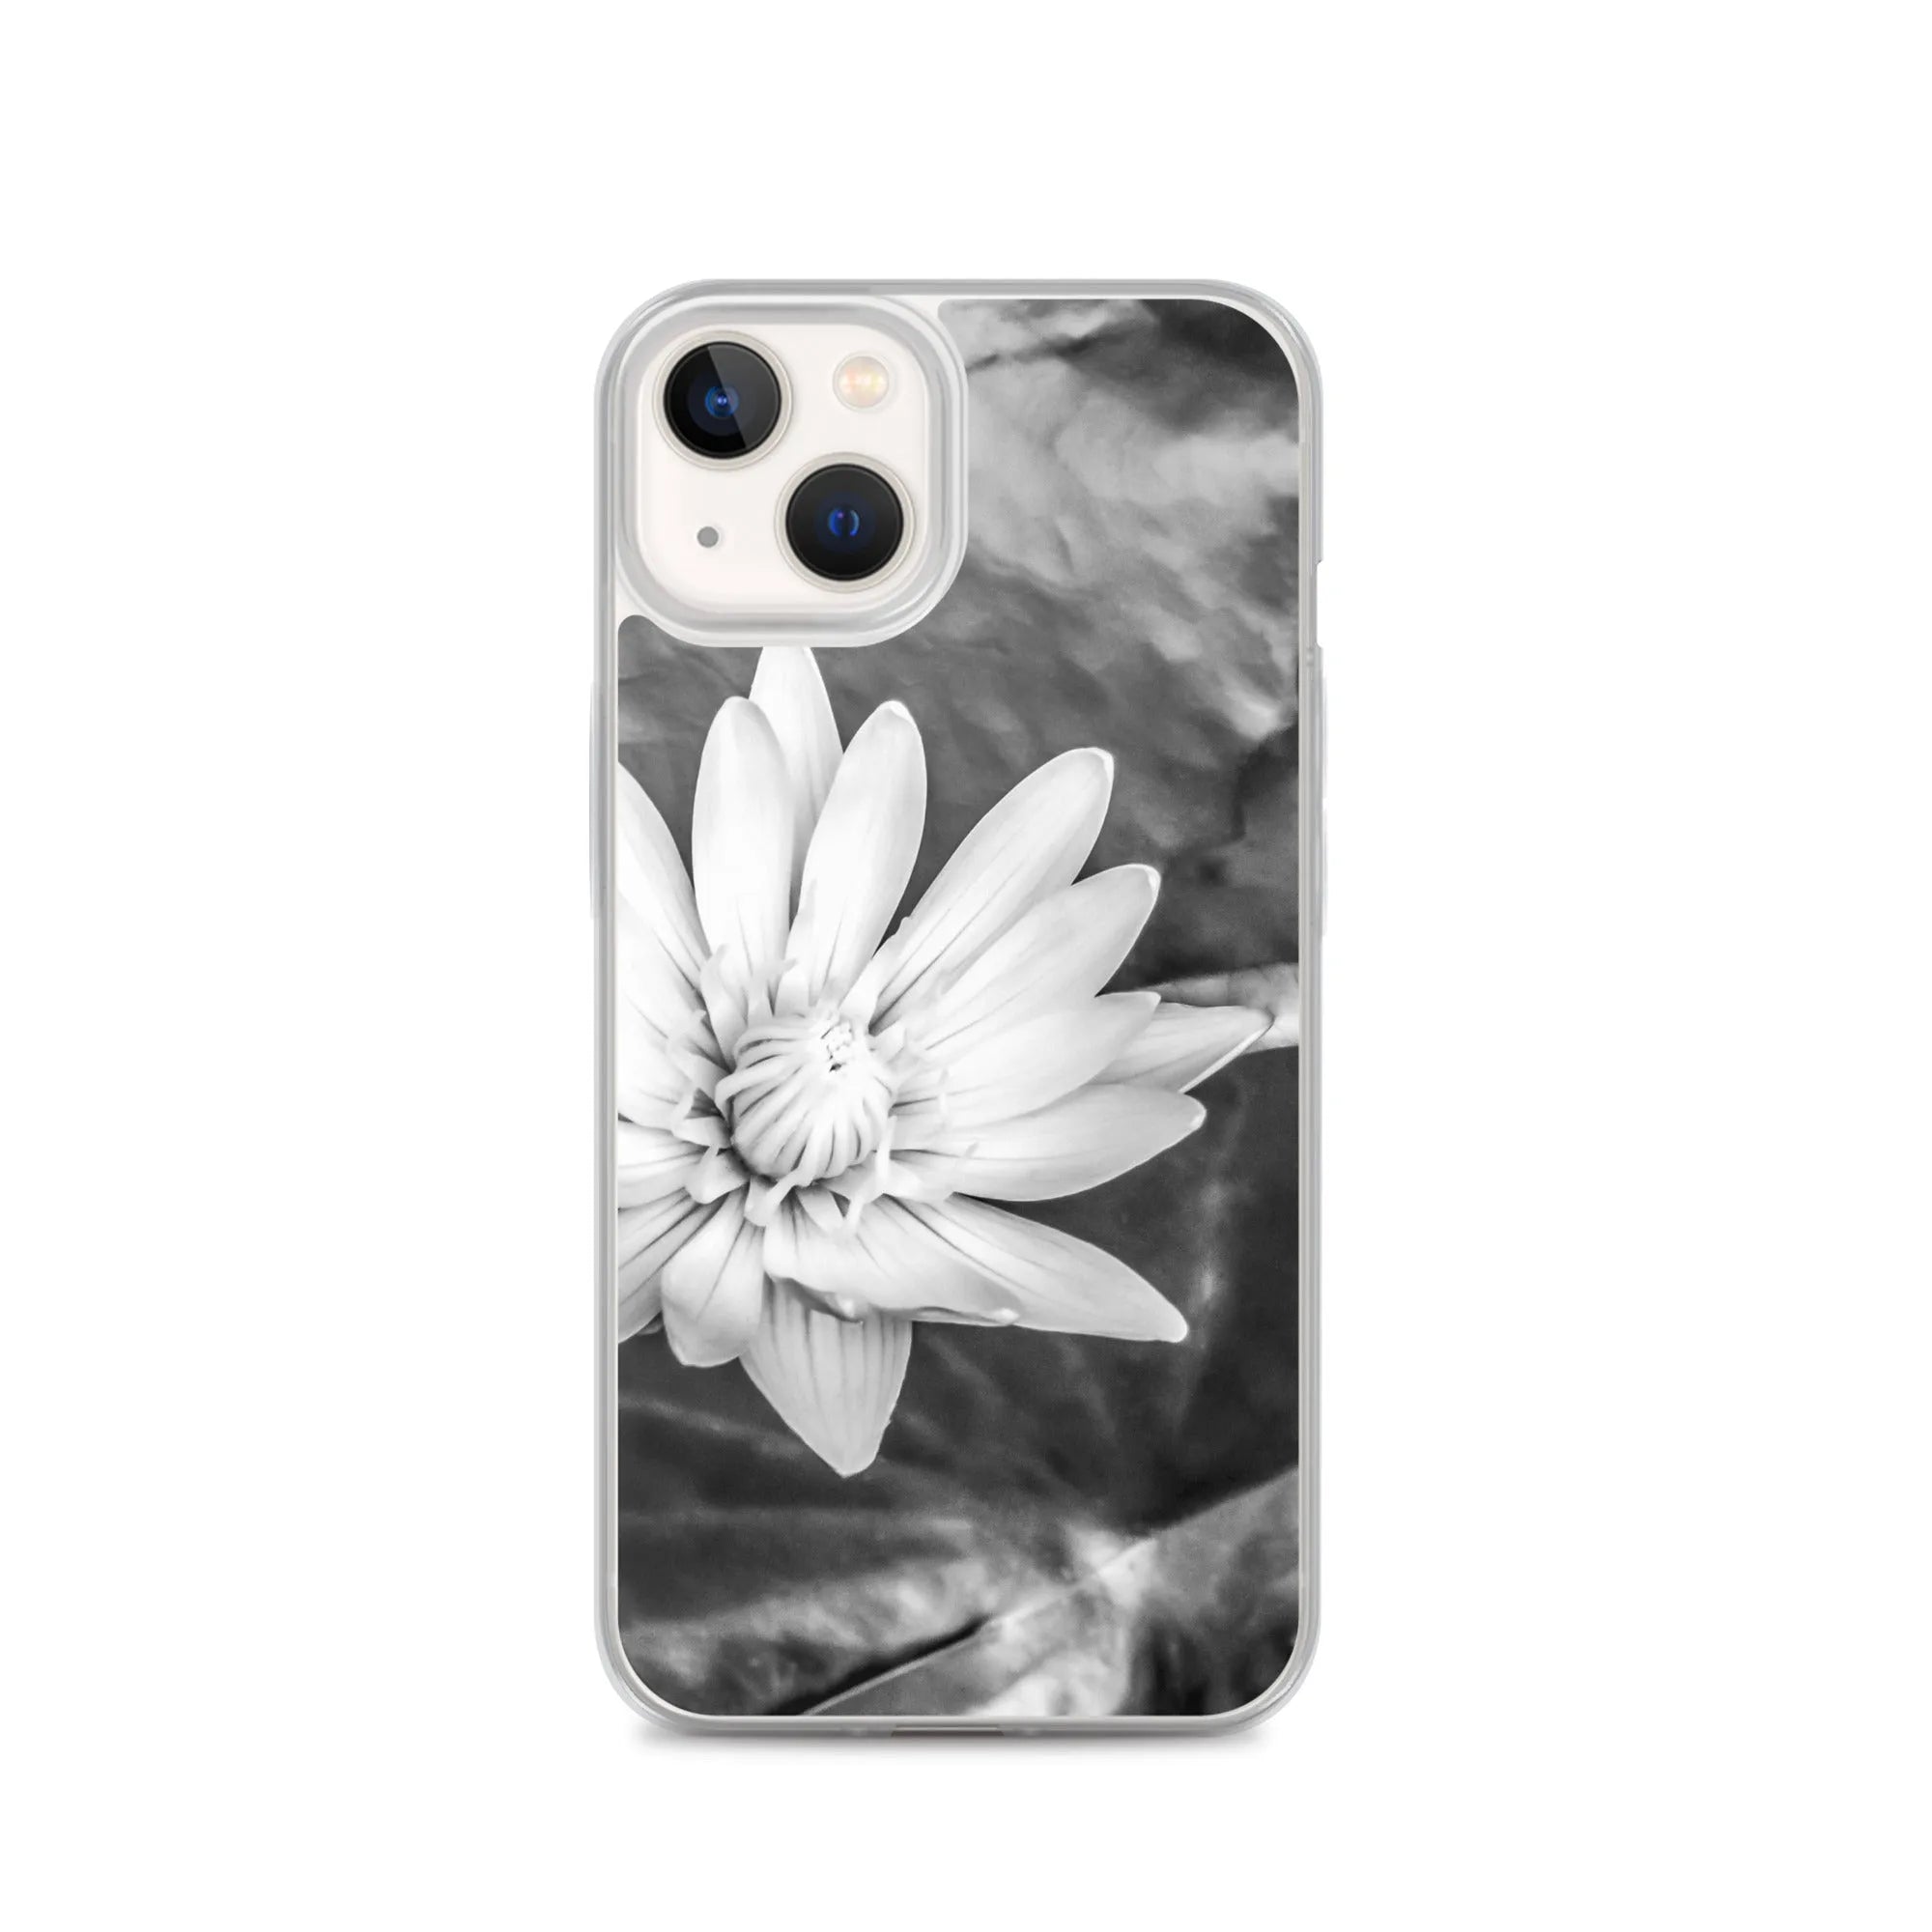 Breakthrough Floral Iphone Case - Black And White - Iphone 13 - Mobile Phone Cases - Aesthetic Art